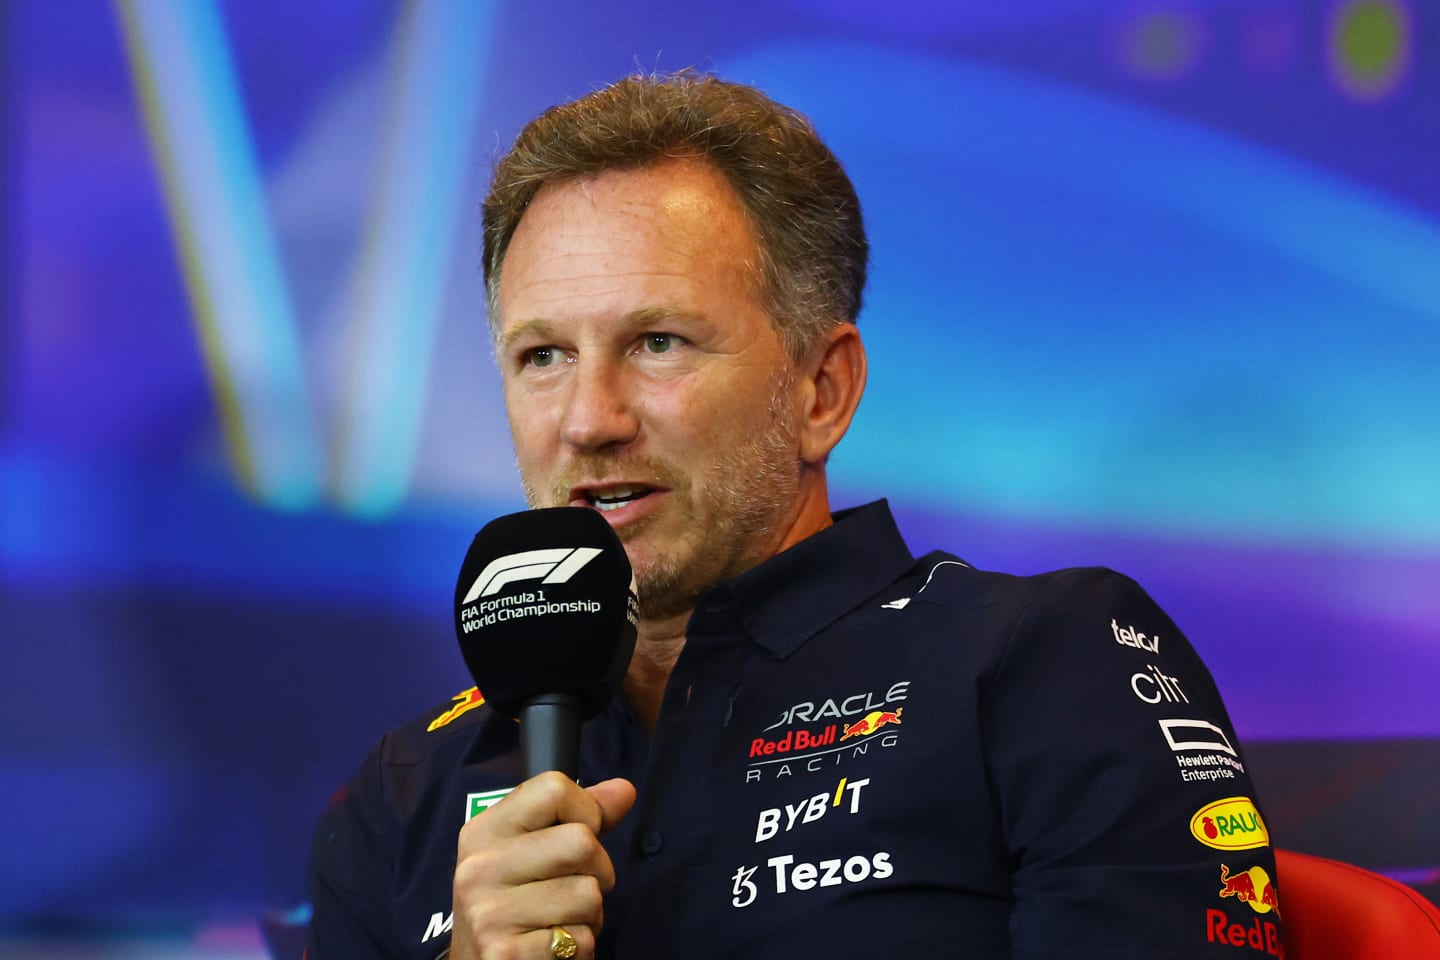 ABU DHABI, UNITED ARAB EMIRATES - NOVEMBER 19: Red Bull Racing Team Principal Christian Horner talks in a press conference during final practice ahead of the F1 Grand Prix of Abu Dhabi at Yas Marina Circuit on November 19, 2022 in Abu Dhabi, United Arab Emirates. (Photo by Bryn Lennon/Getty Images)